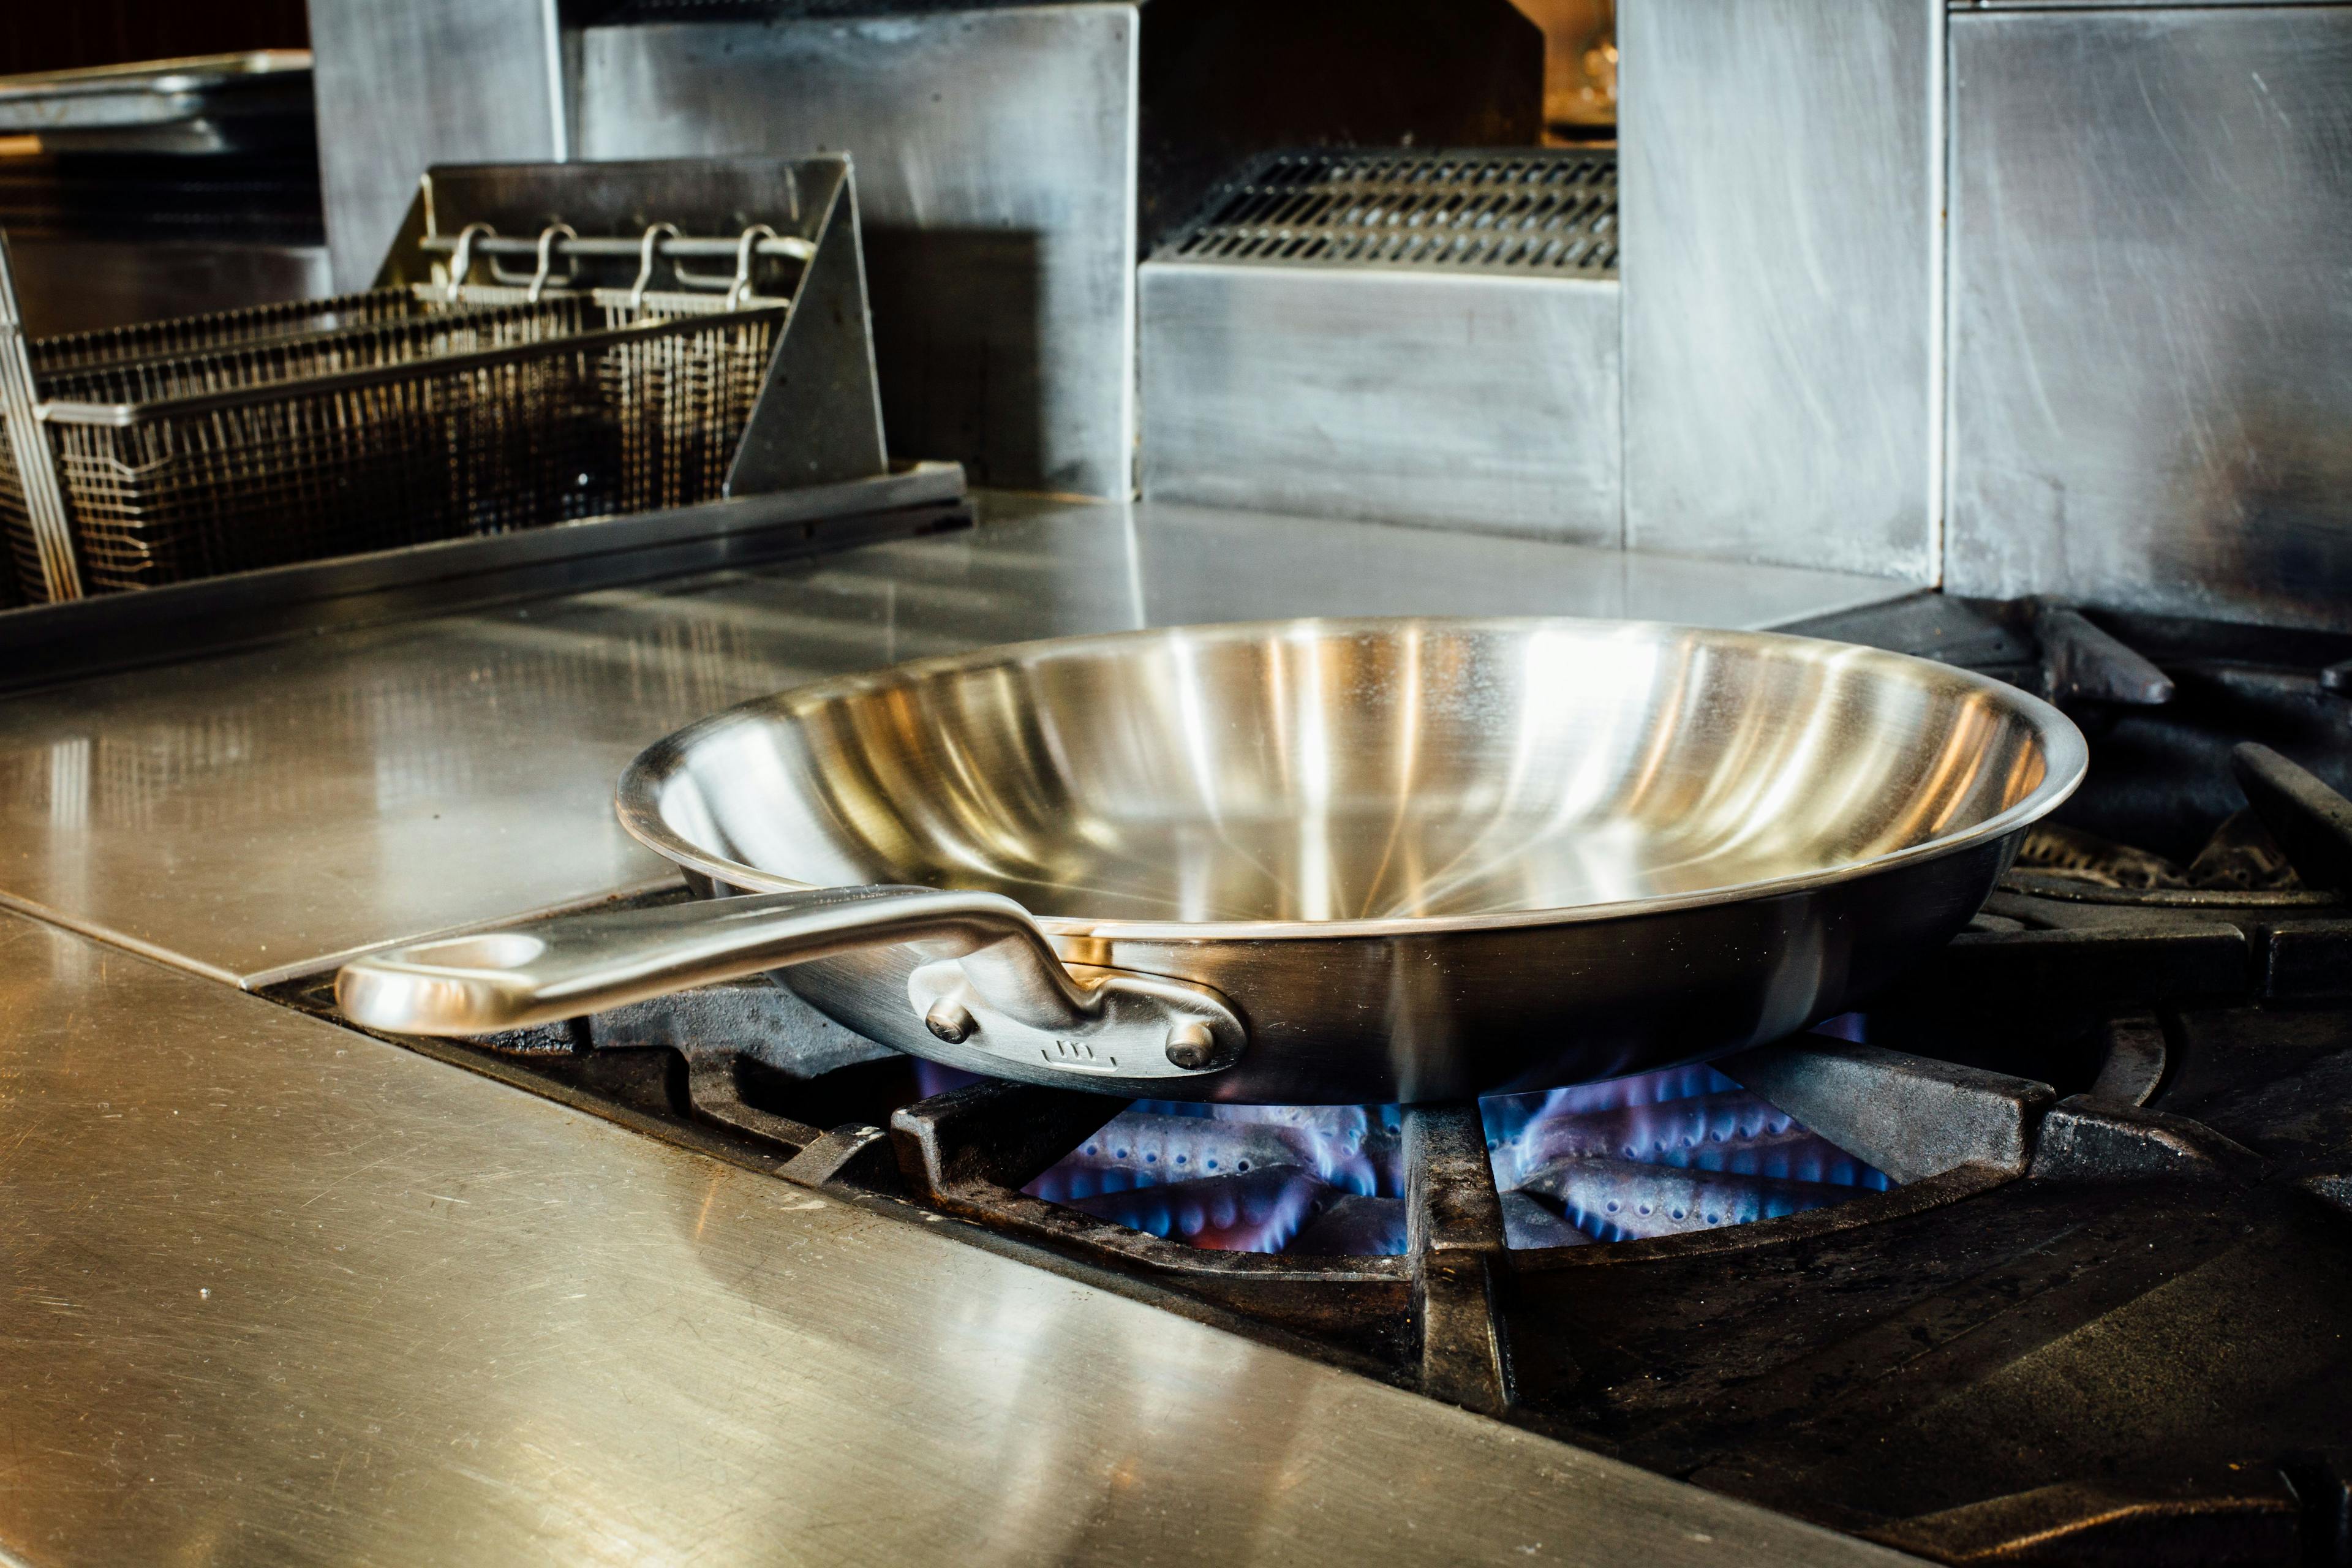 Stainless clad frying pan on stove